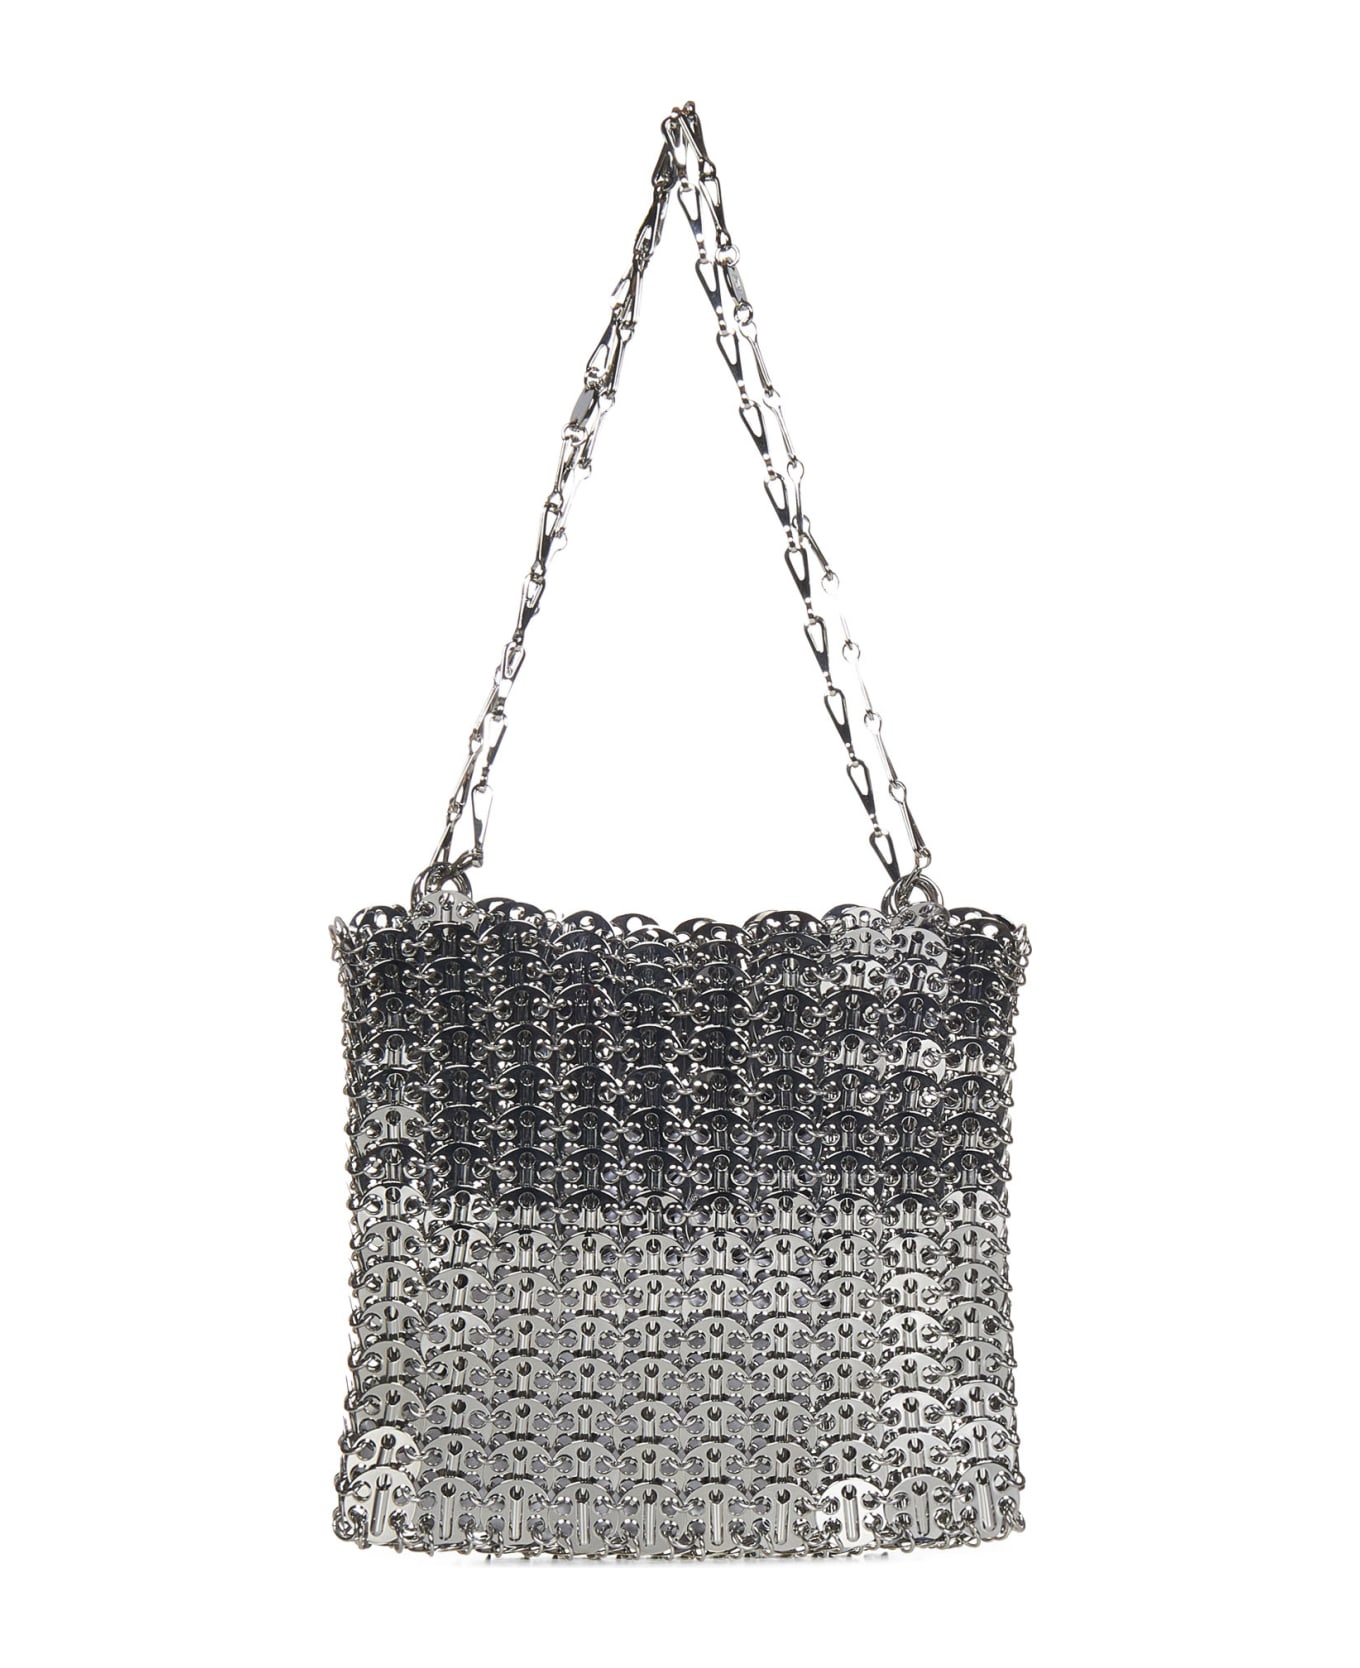 Paco Rabanne Iconic Silver 1969 Shoulder Bag - Silver